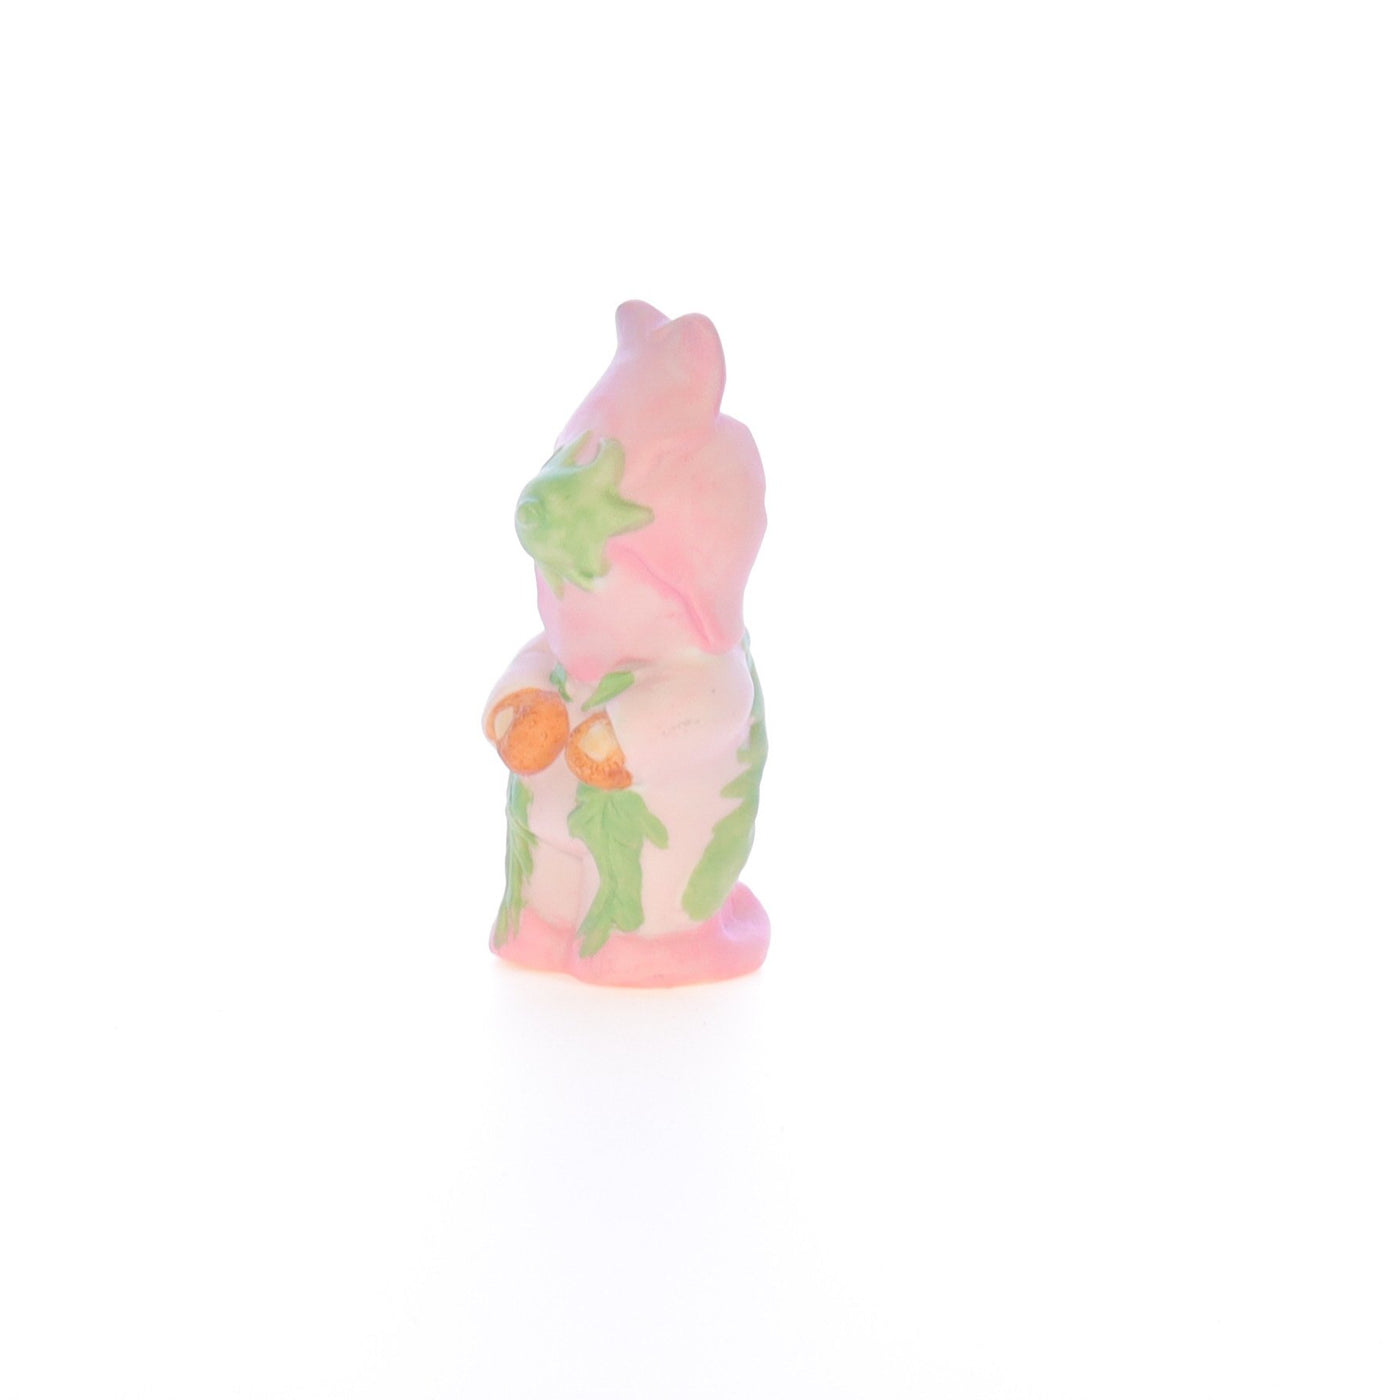 Lucy_And_Me_by_Lucy_Atwell_Porcelain_Figurine_Bear_with_Pink_Flower_Costume_Lucy_Unknown_011_06